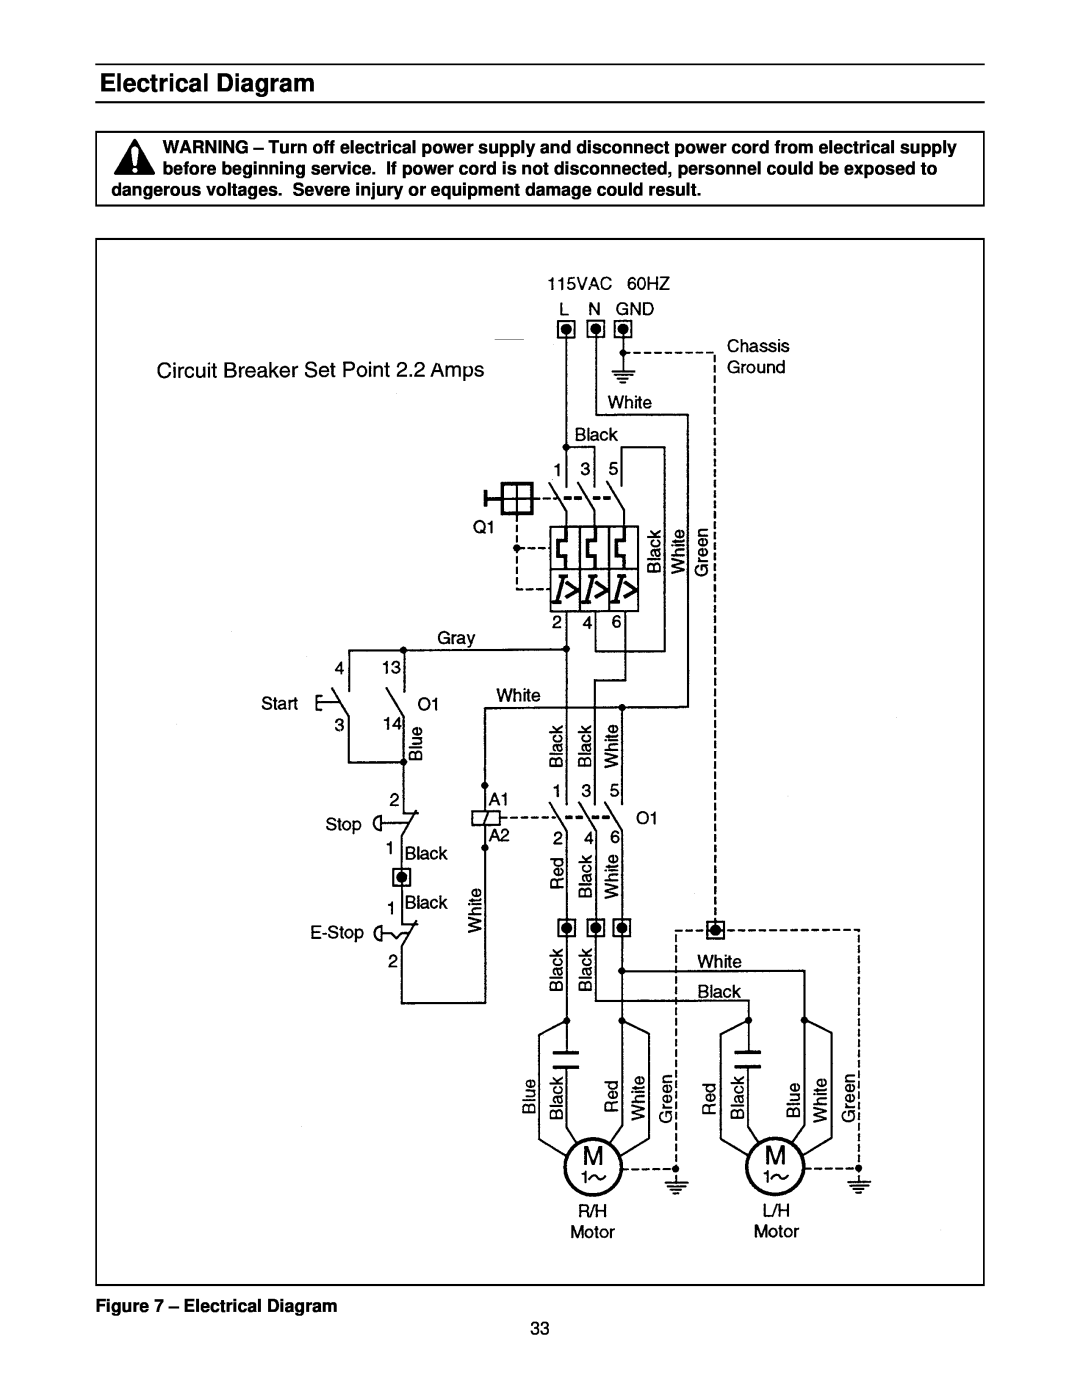 3M 39600 manual Electrical Diagram, dangerous voltages. Severe injury or equipment damage could result 